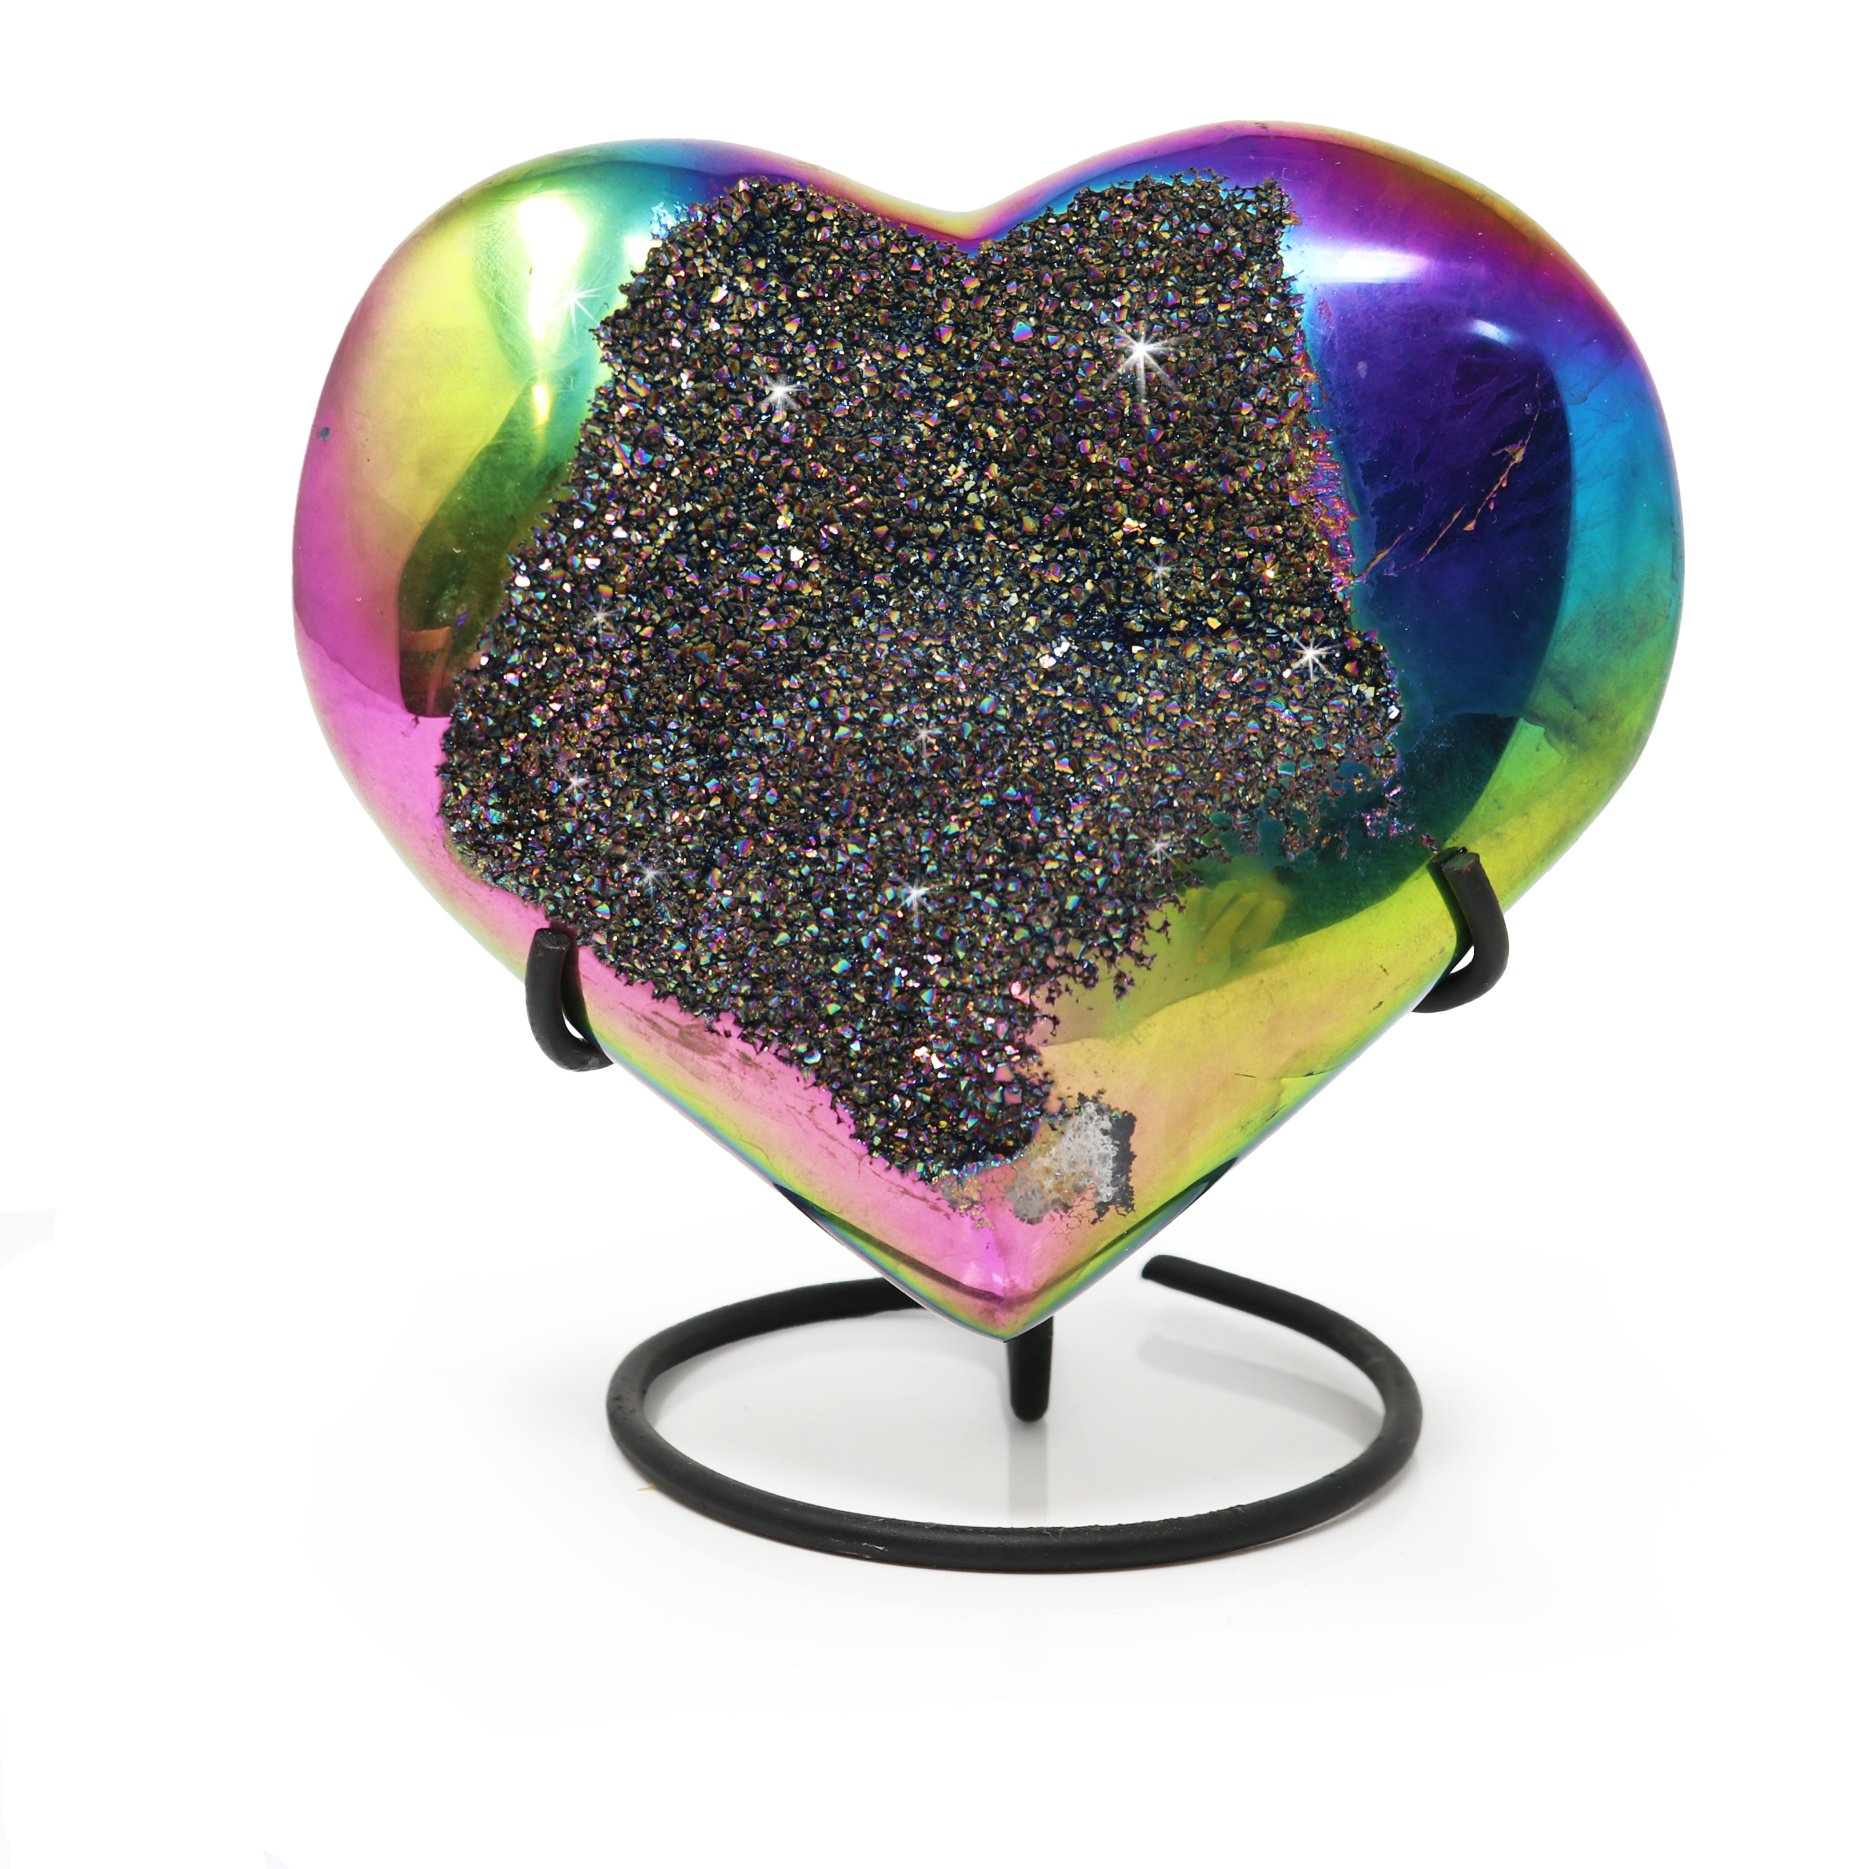 Rainbow Titanium Druze Geode Heart On Fitted Spiral Stand - Star Shaped Flat Druze Pocket